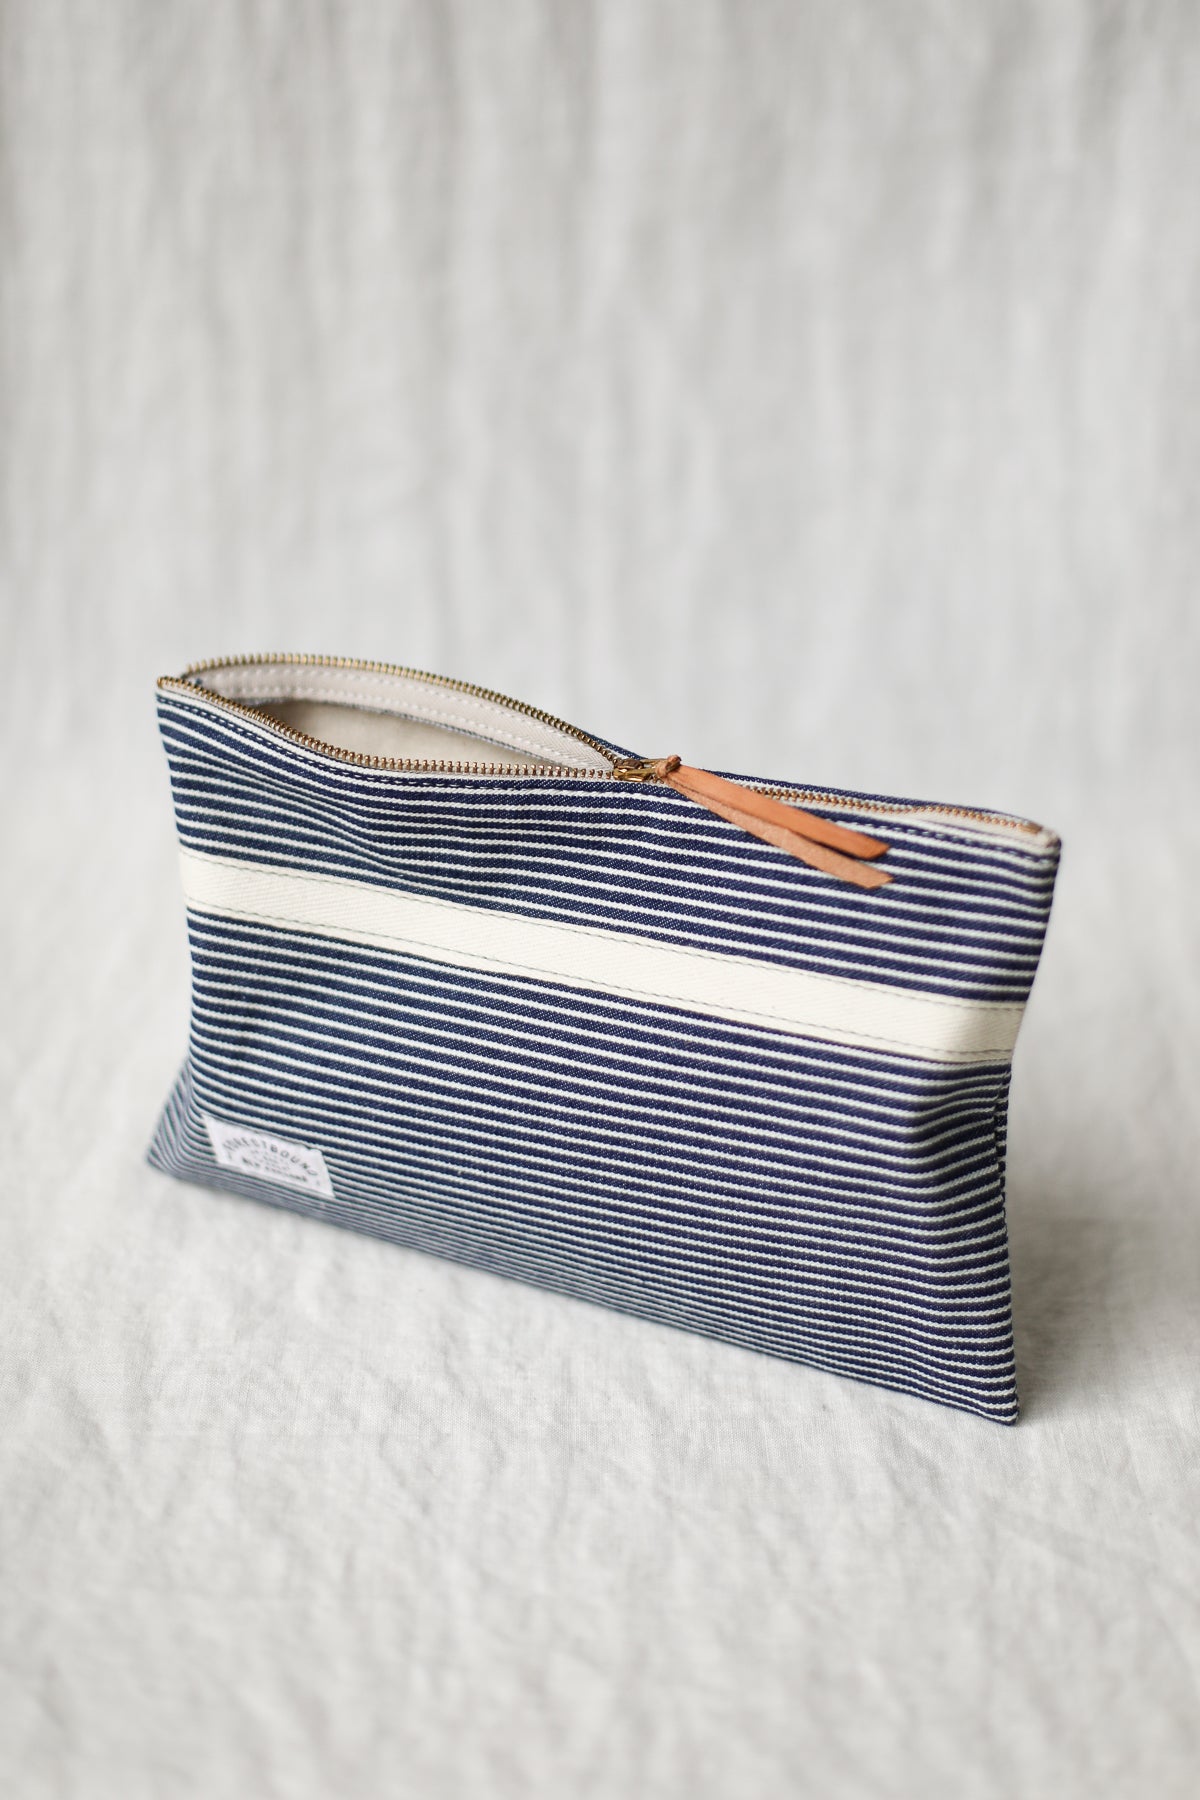 1950's era Salvaged Ticking Fabric Utility Pouch